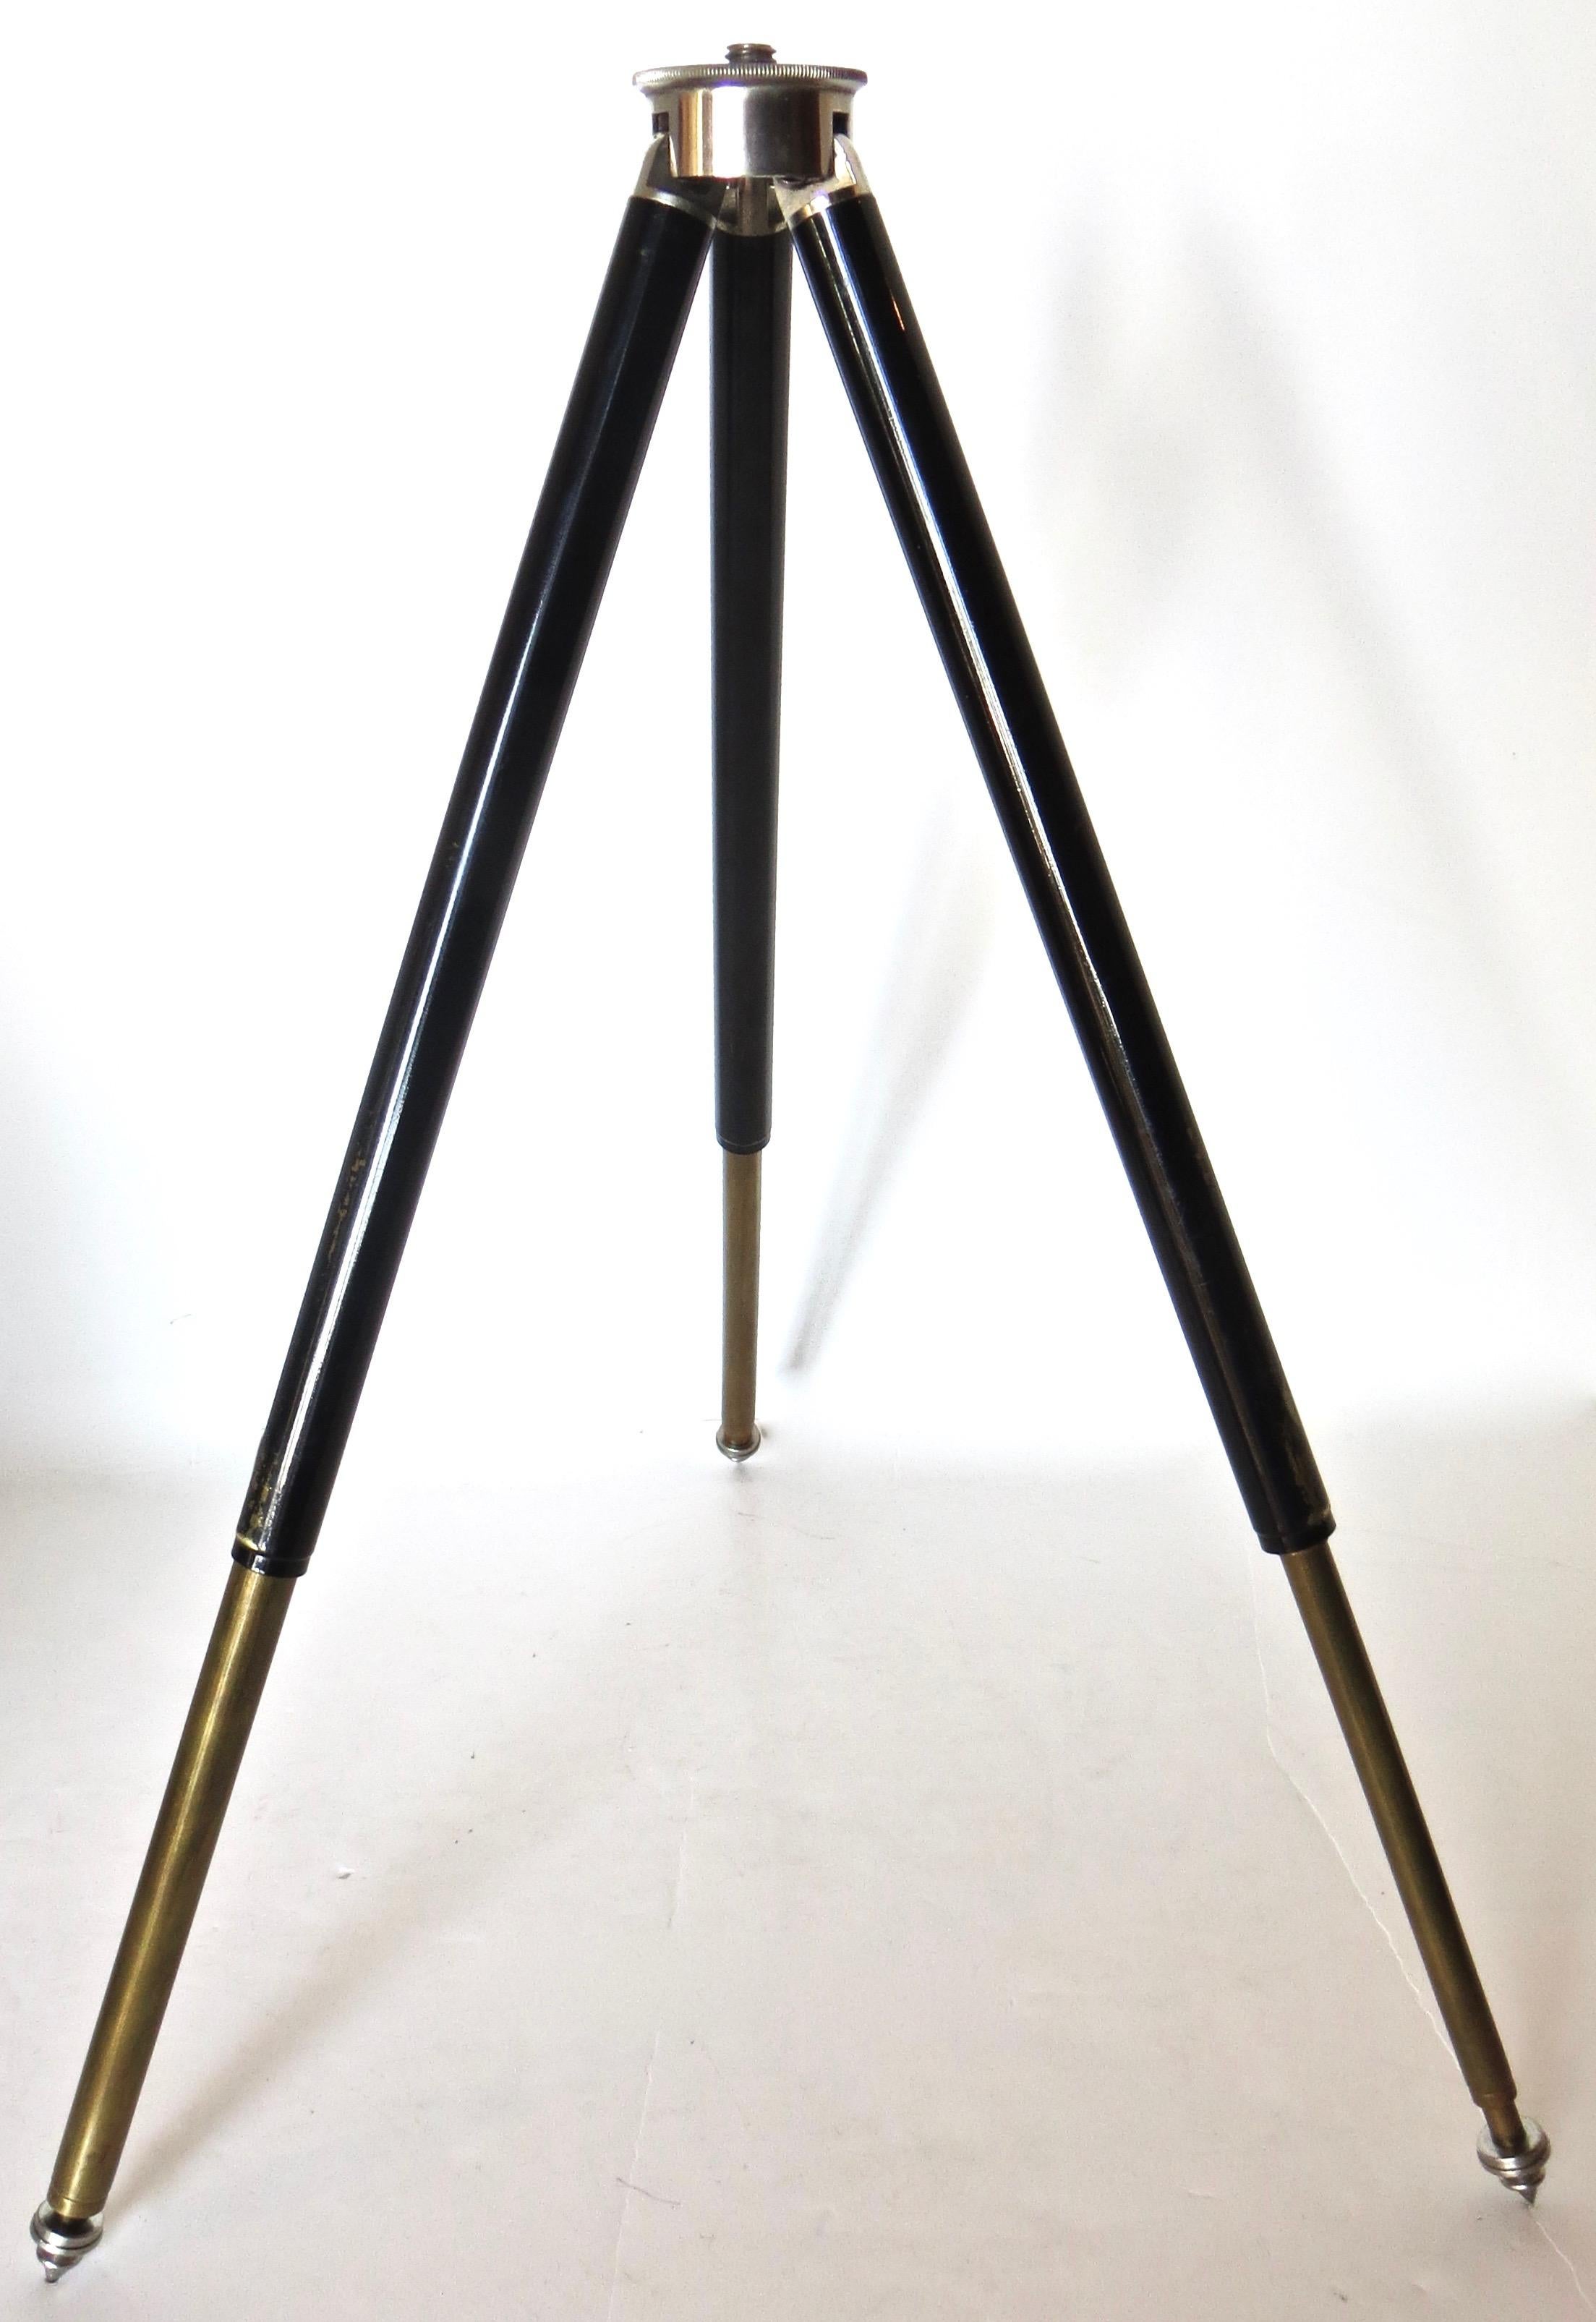 Art Deco Vintage Miniature German Variable Camera Tripod 1920s with Ansel Adams Book For Sale